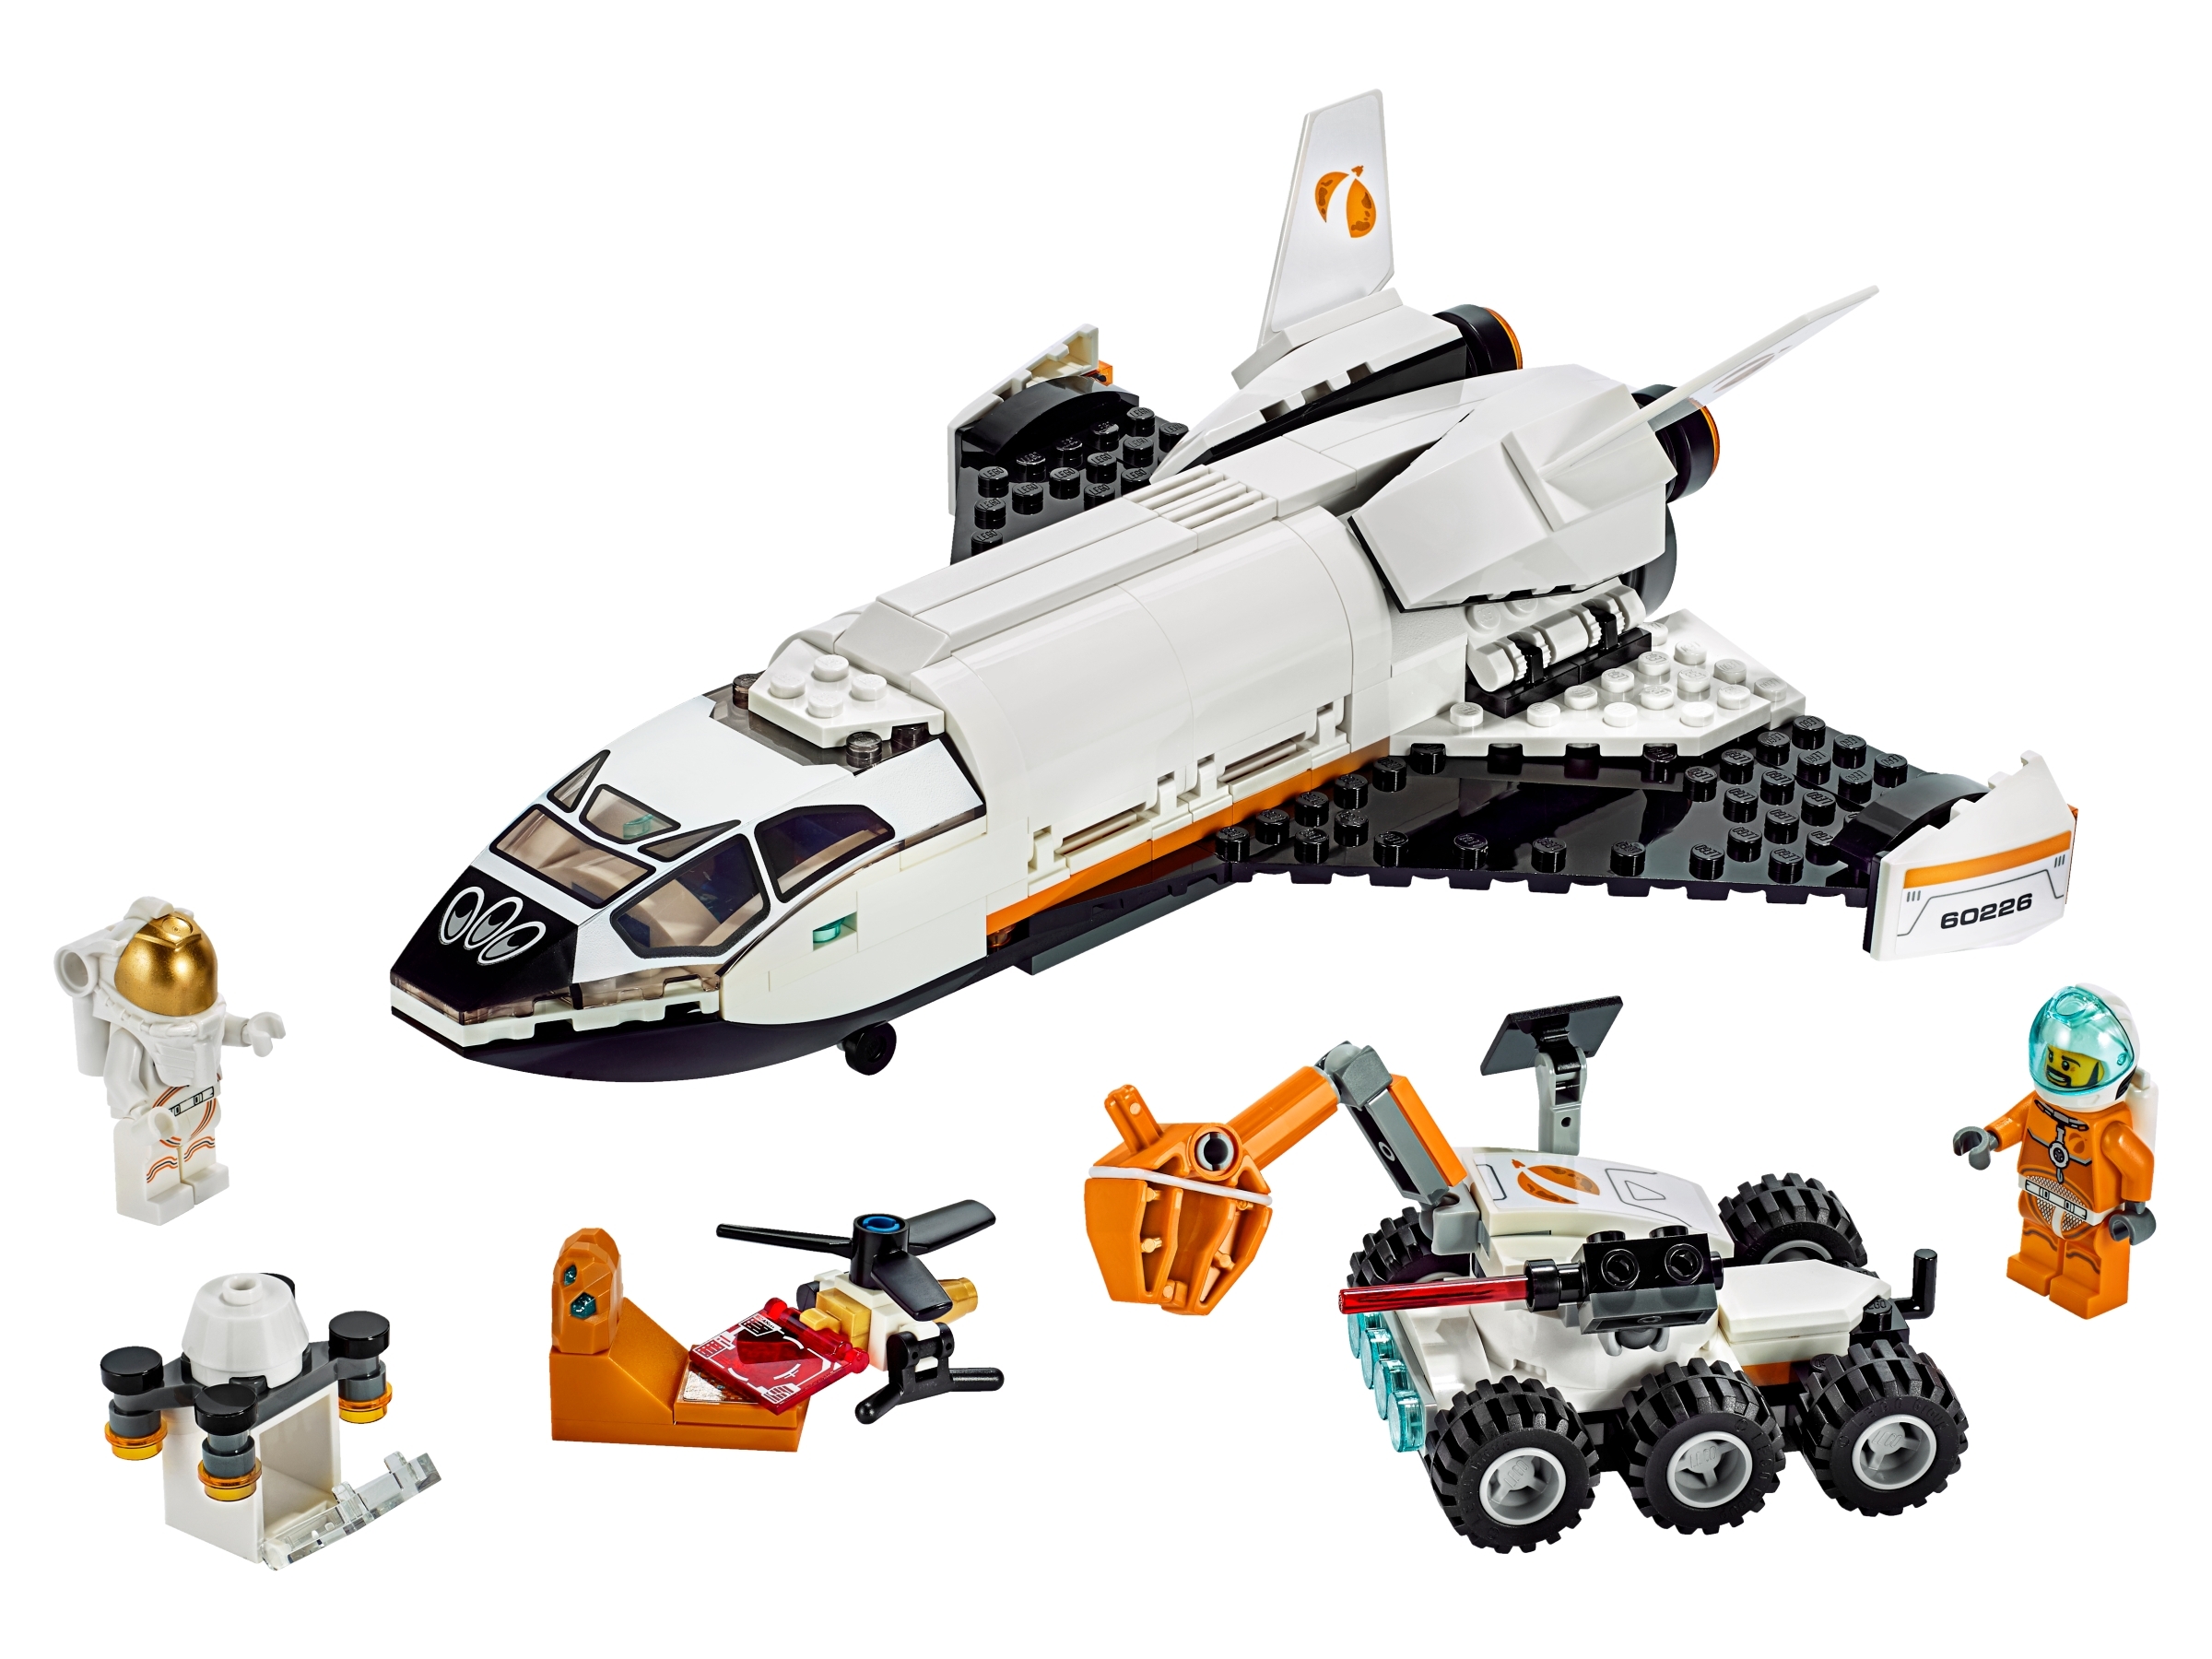 Mars Research Shuttle 60226 | City 